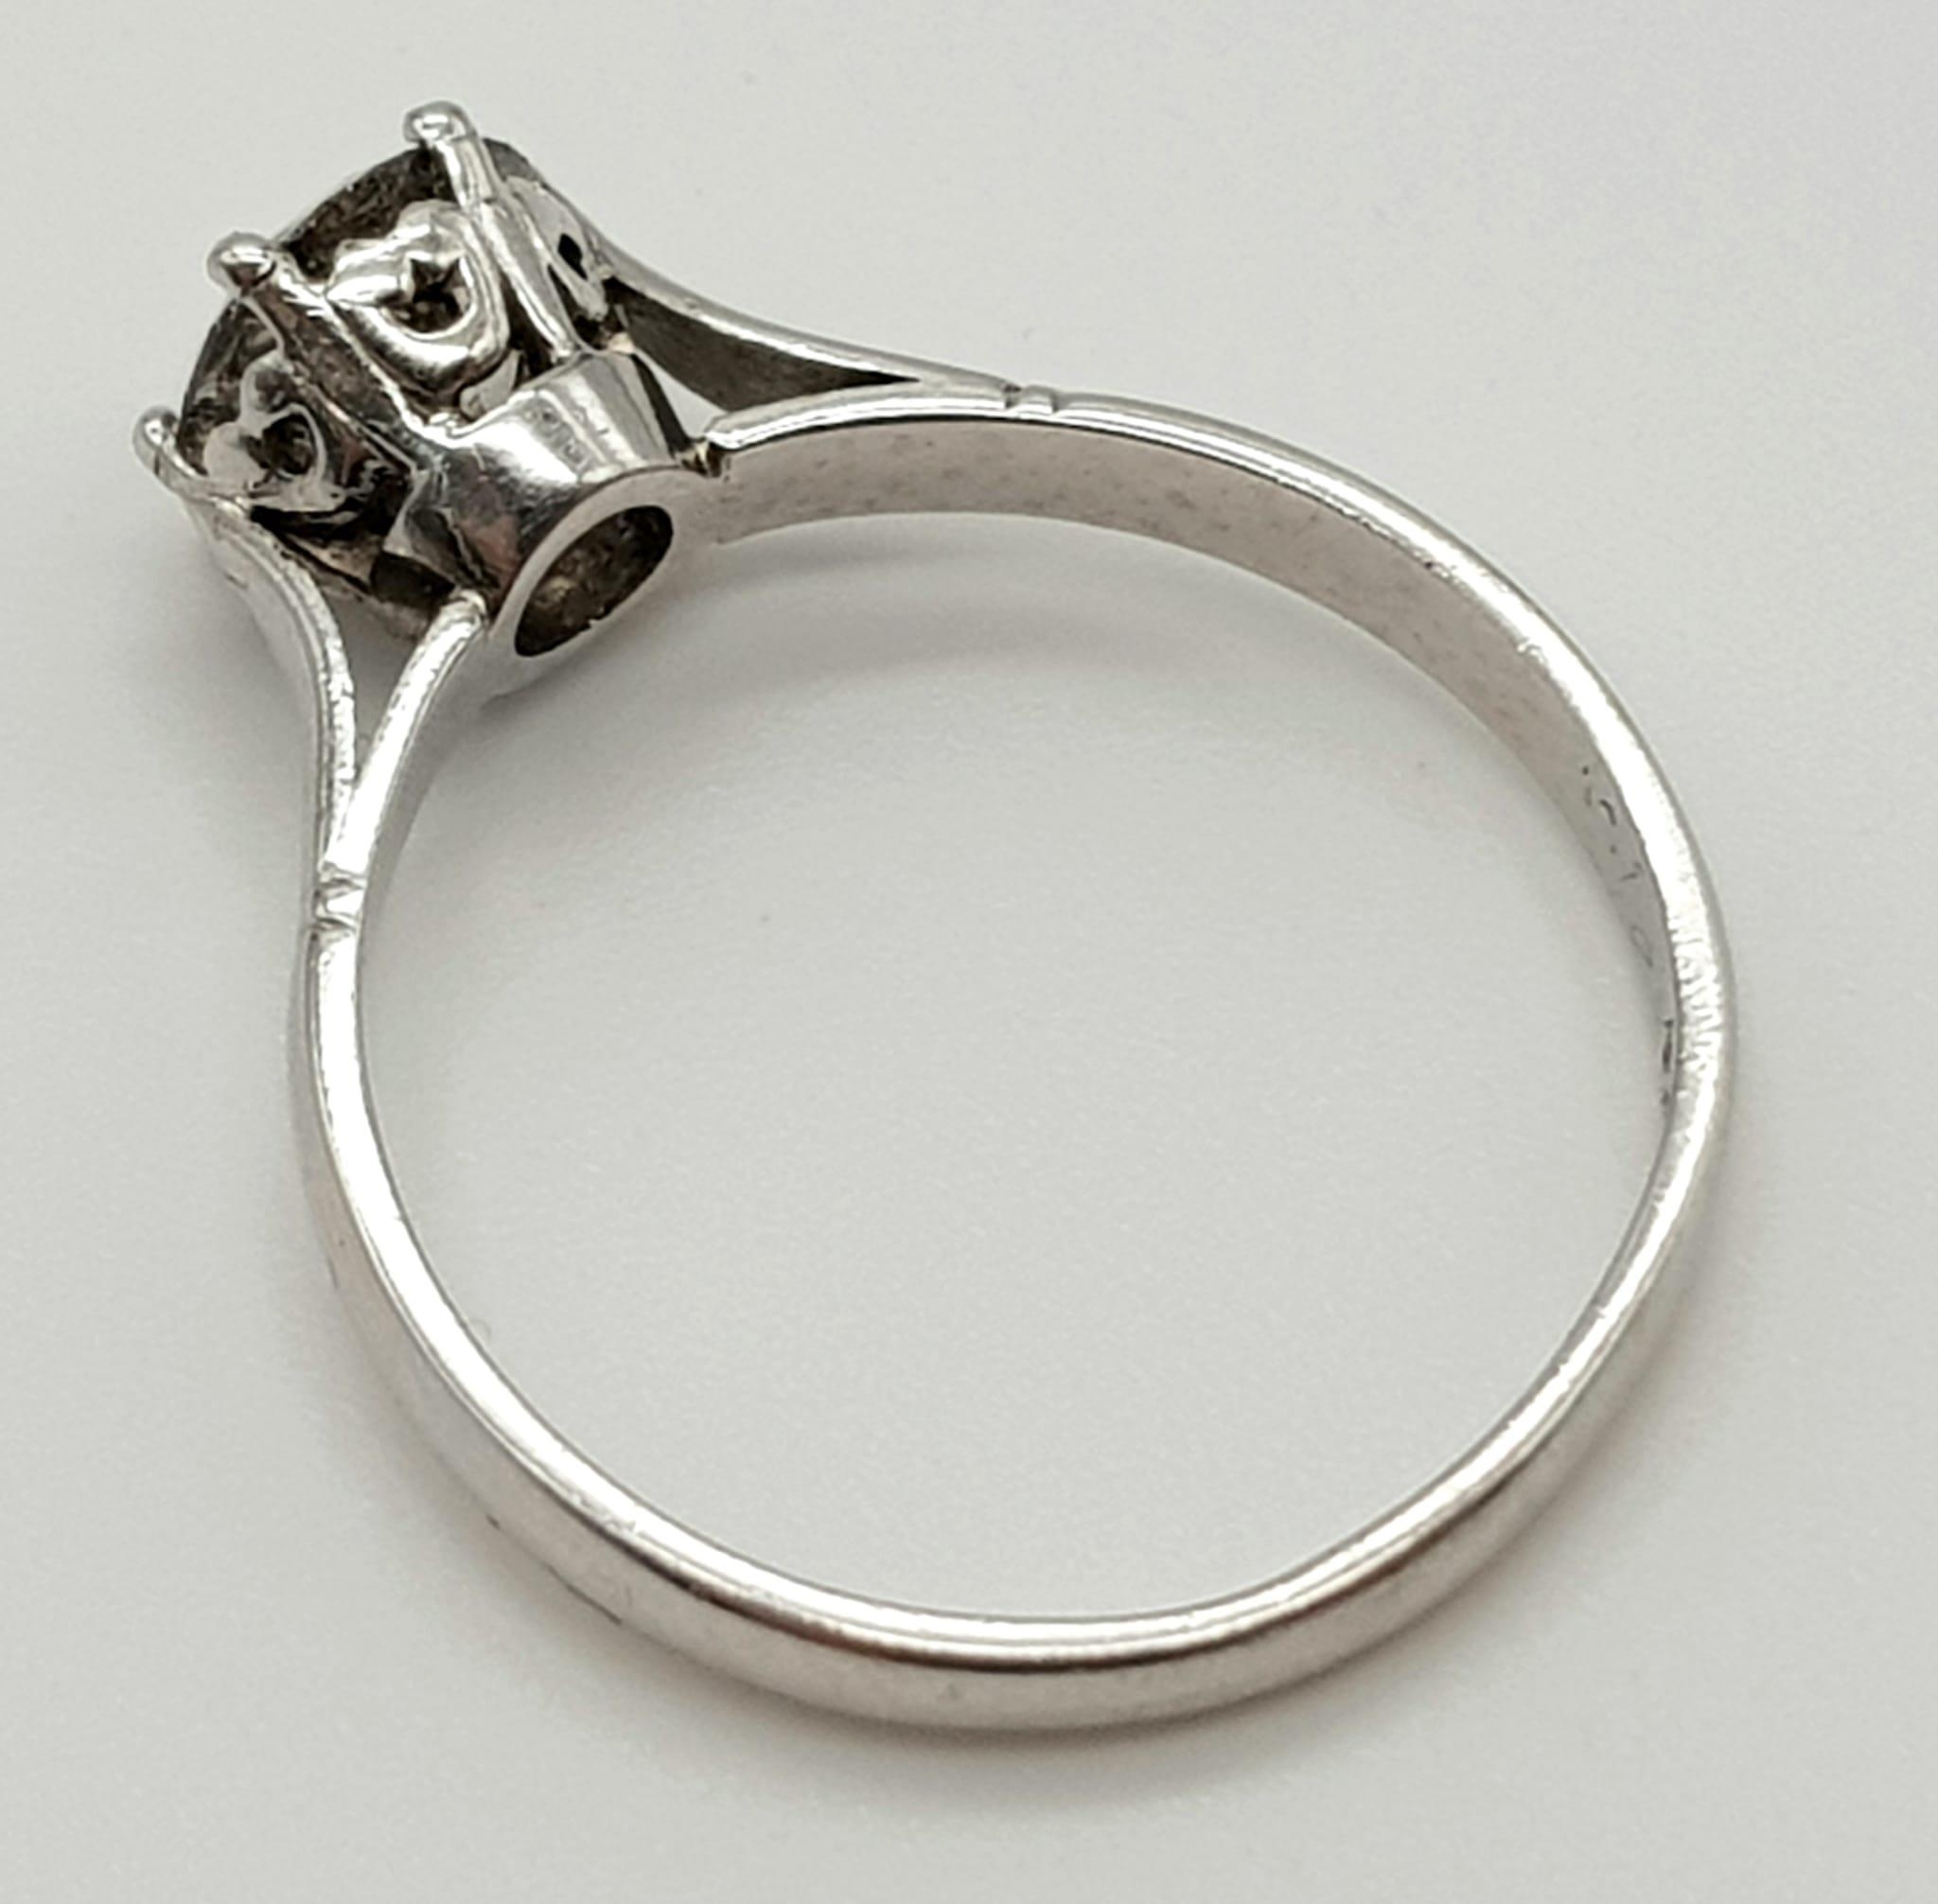 PLATINUM DIAMOND SOLIATIRE RING. 1.30CT APPROX DIAMOND. TOTAL WEIGHT 9.5G SIZE R - Image 4 of 6